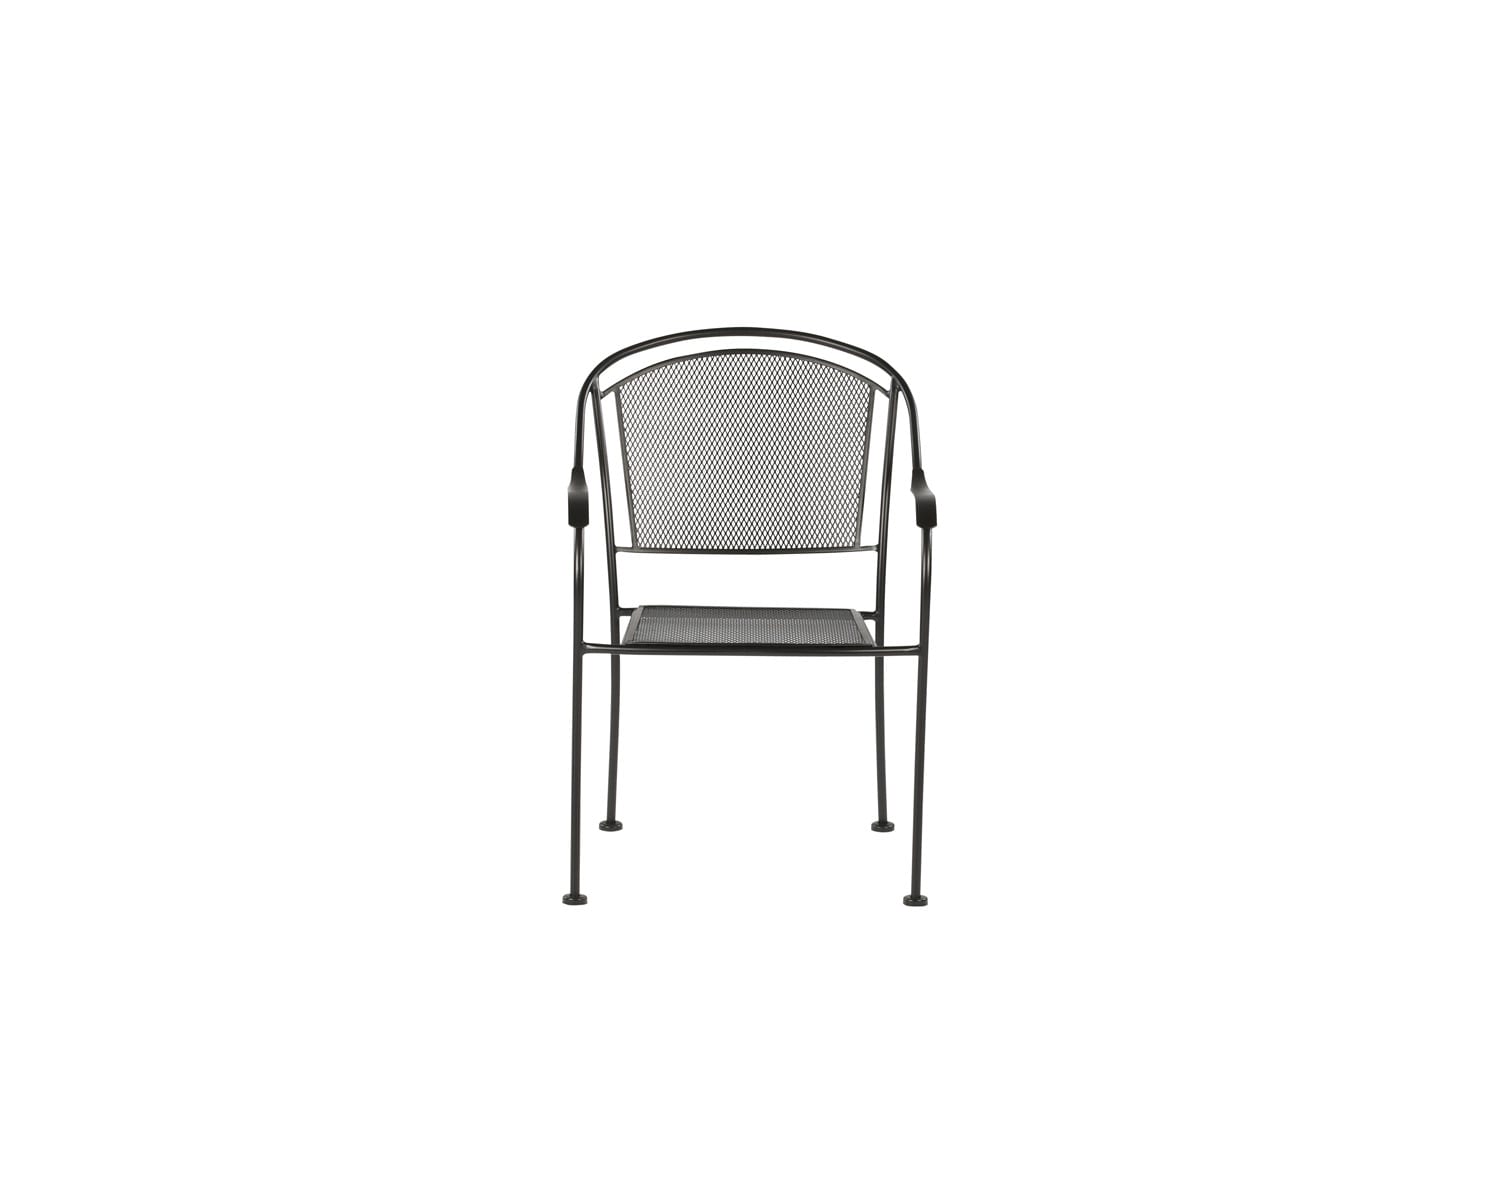 With Mesh Seat In The Patio Chairs, Garden Treasures Davenport Stackable Metal Stationary Dining Chairs With Mesh Seat